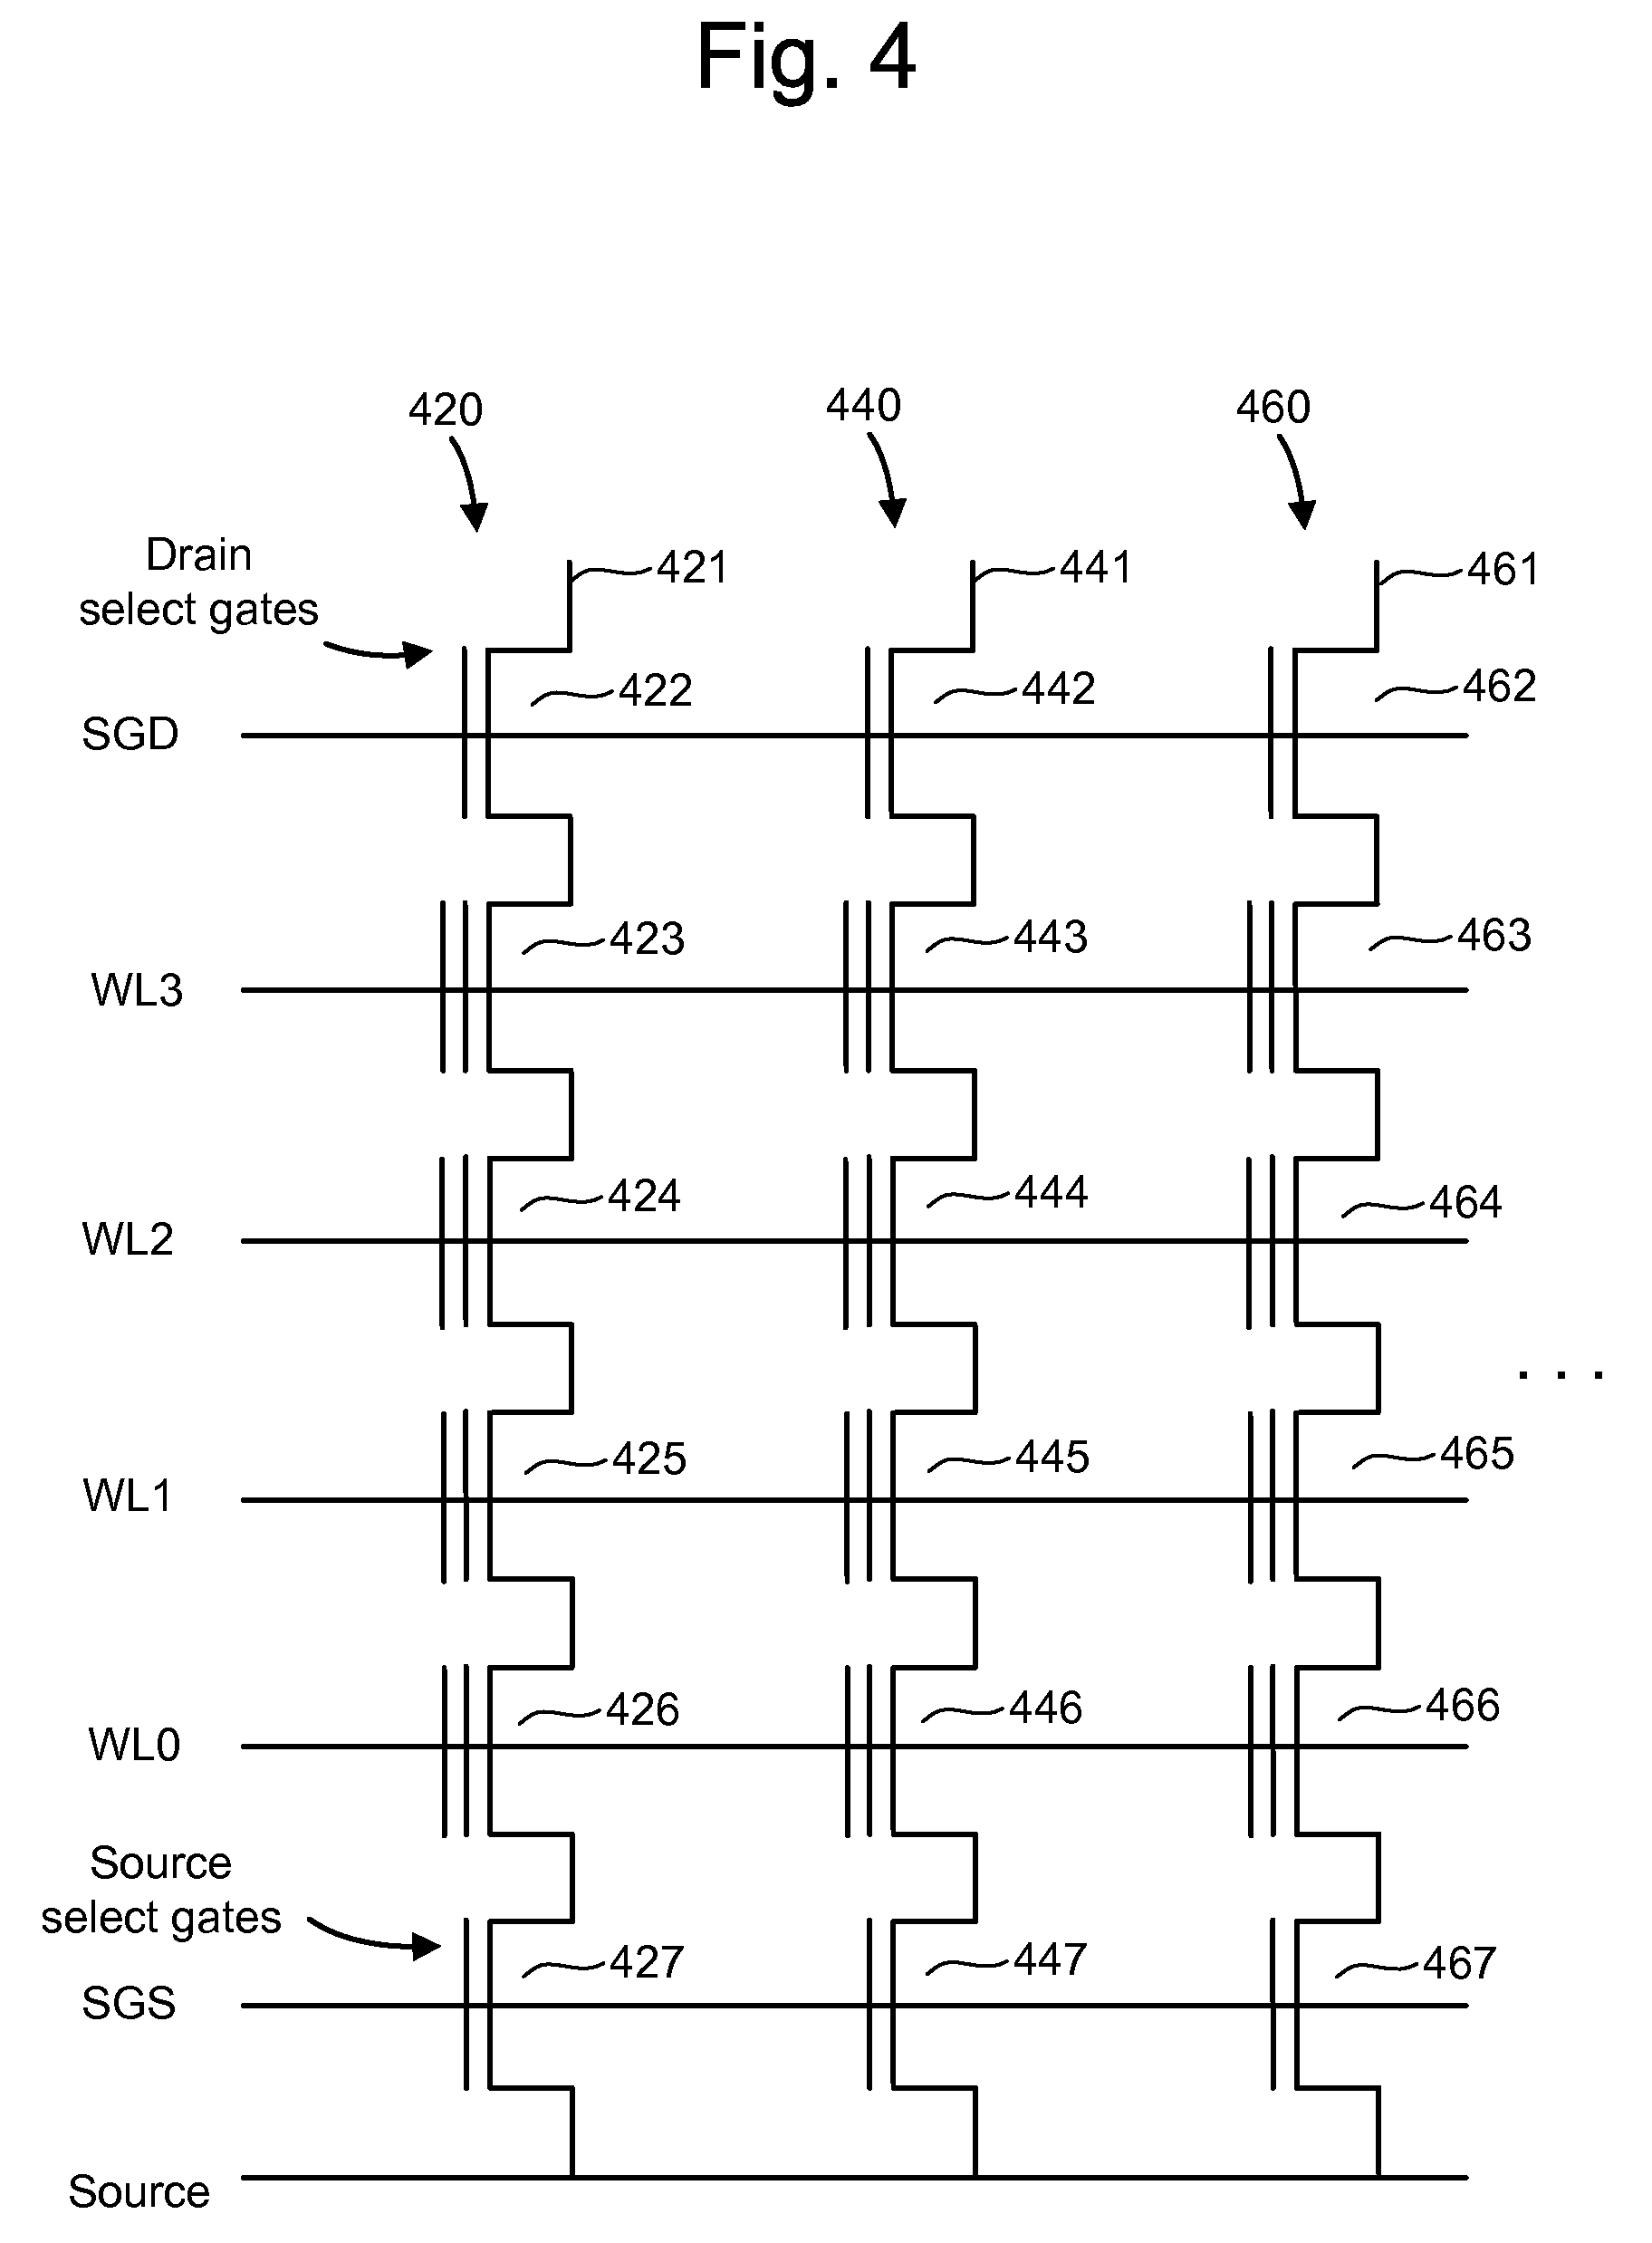 Method for increasing programming speed for non-volatile memory by applying counter-transitioning waveforms to word lines